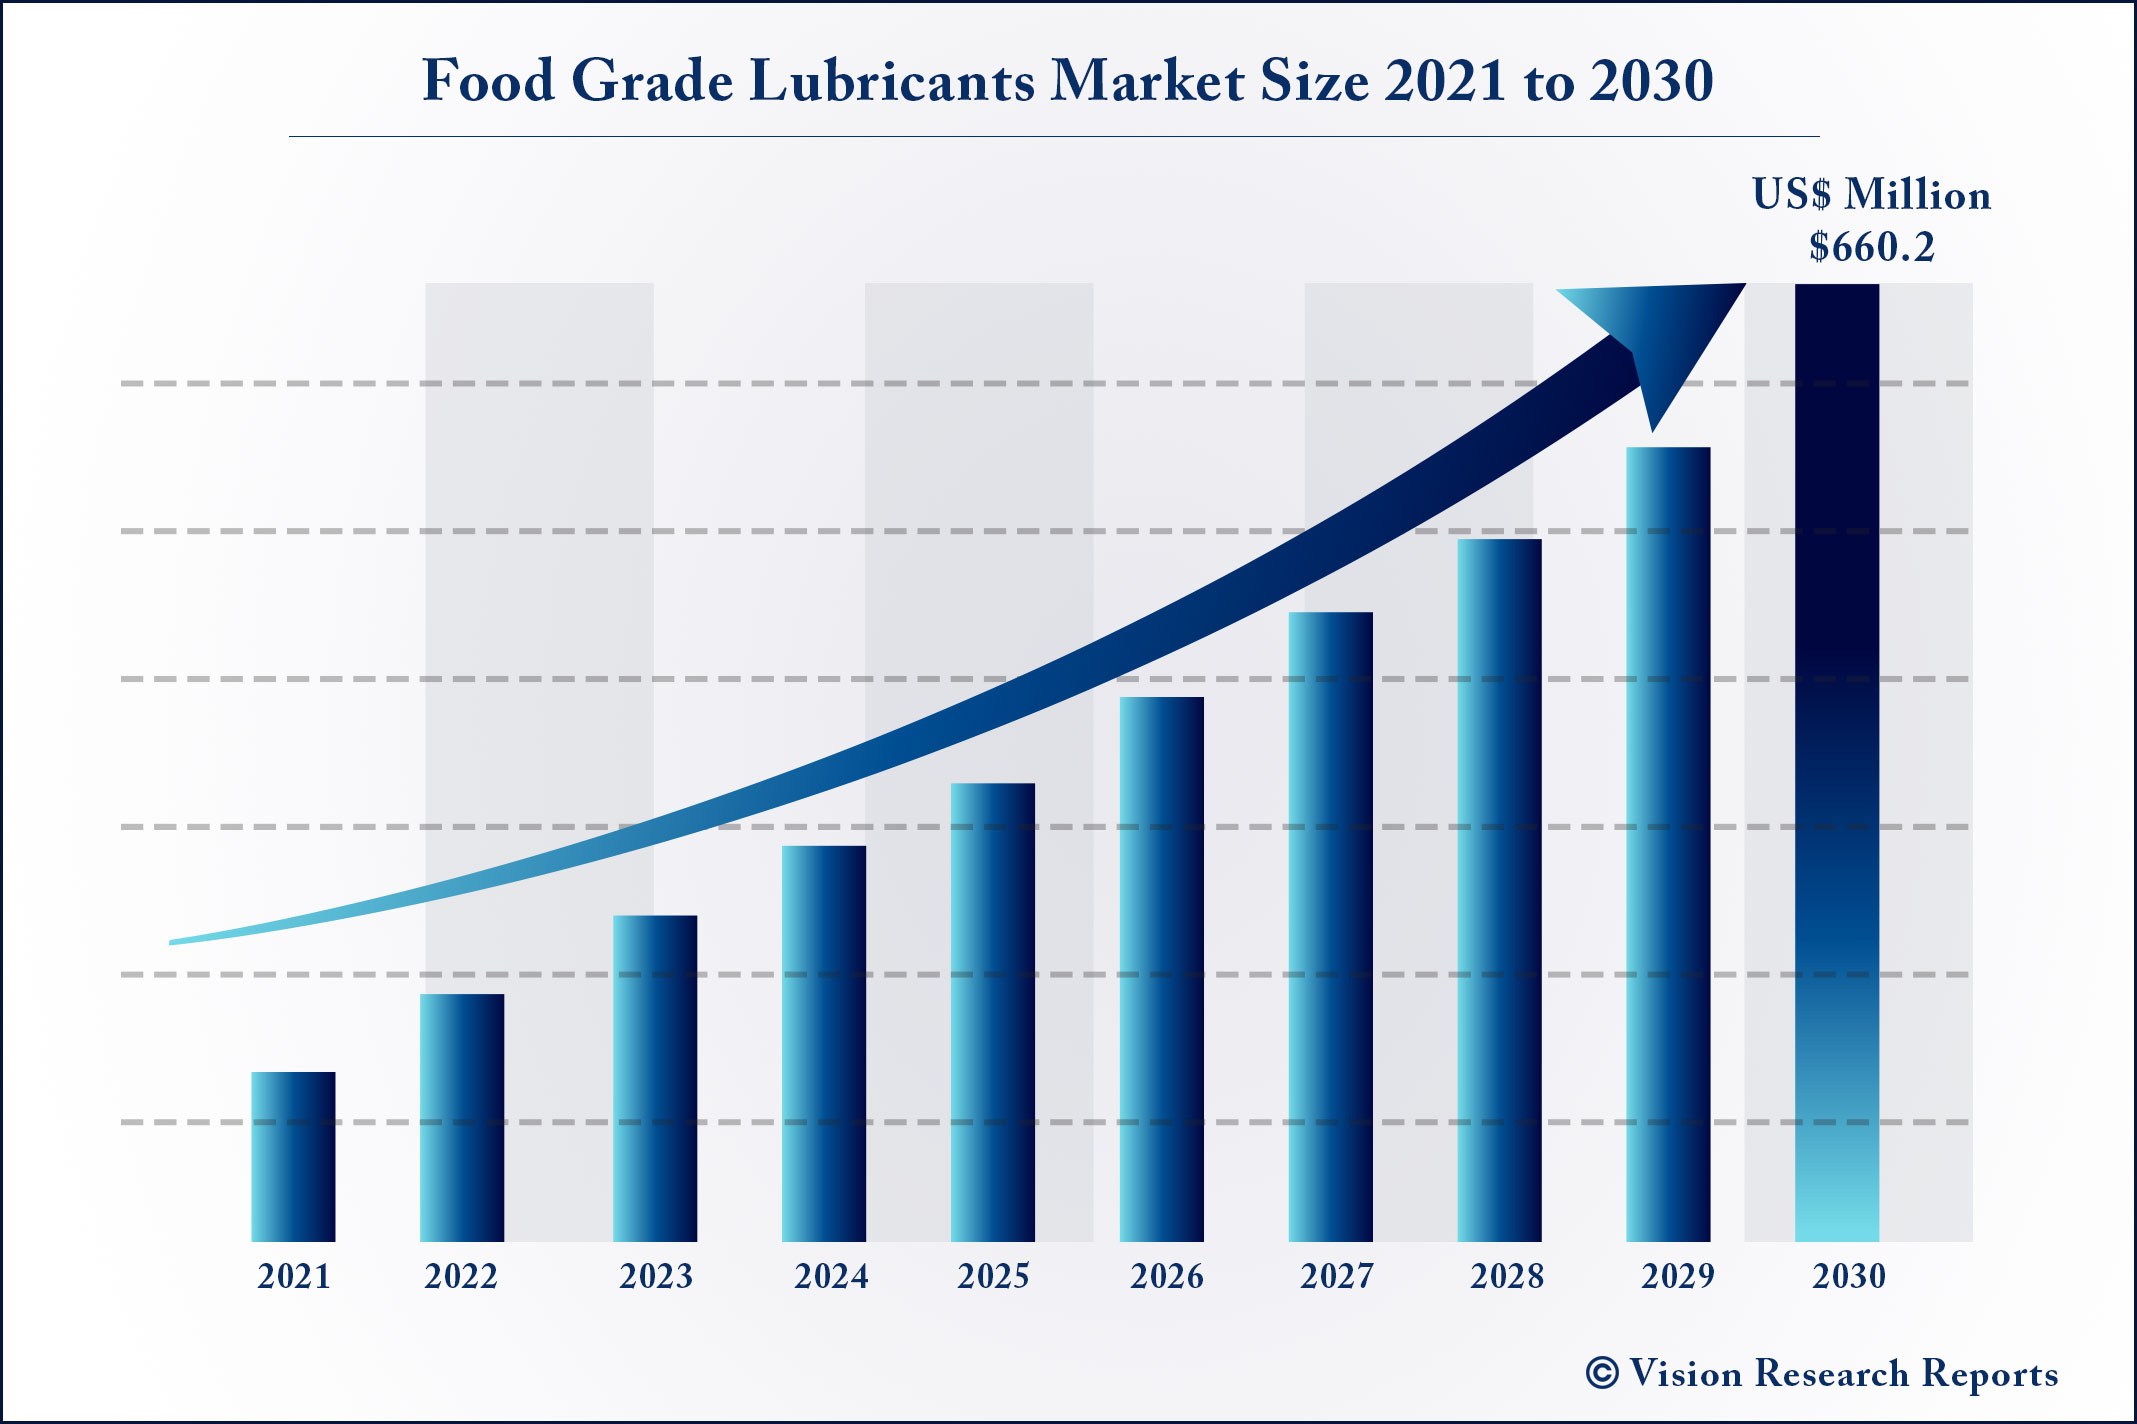 Food Grade Lubricants Market Size 2021 to 2030